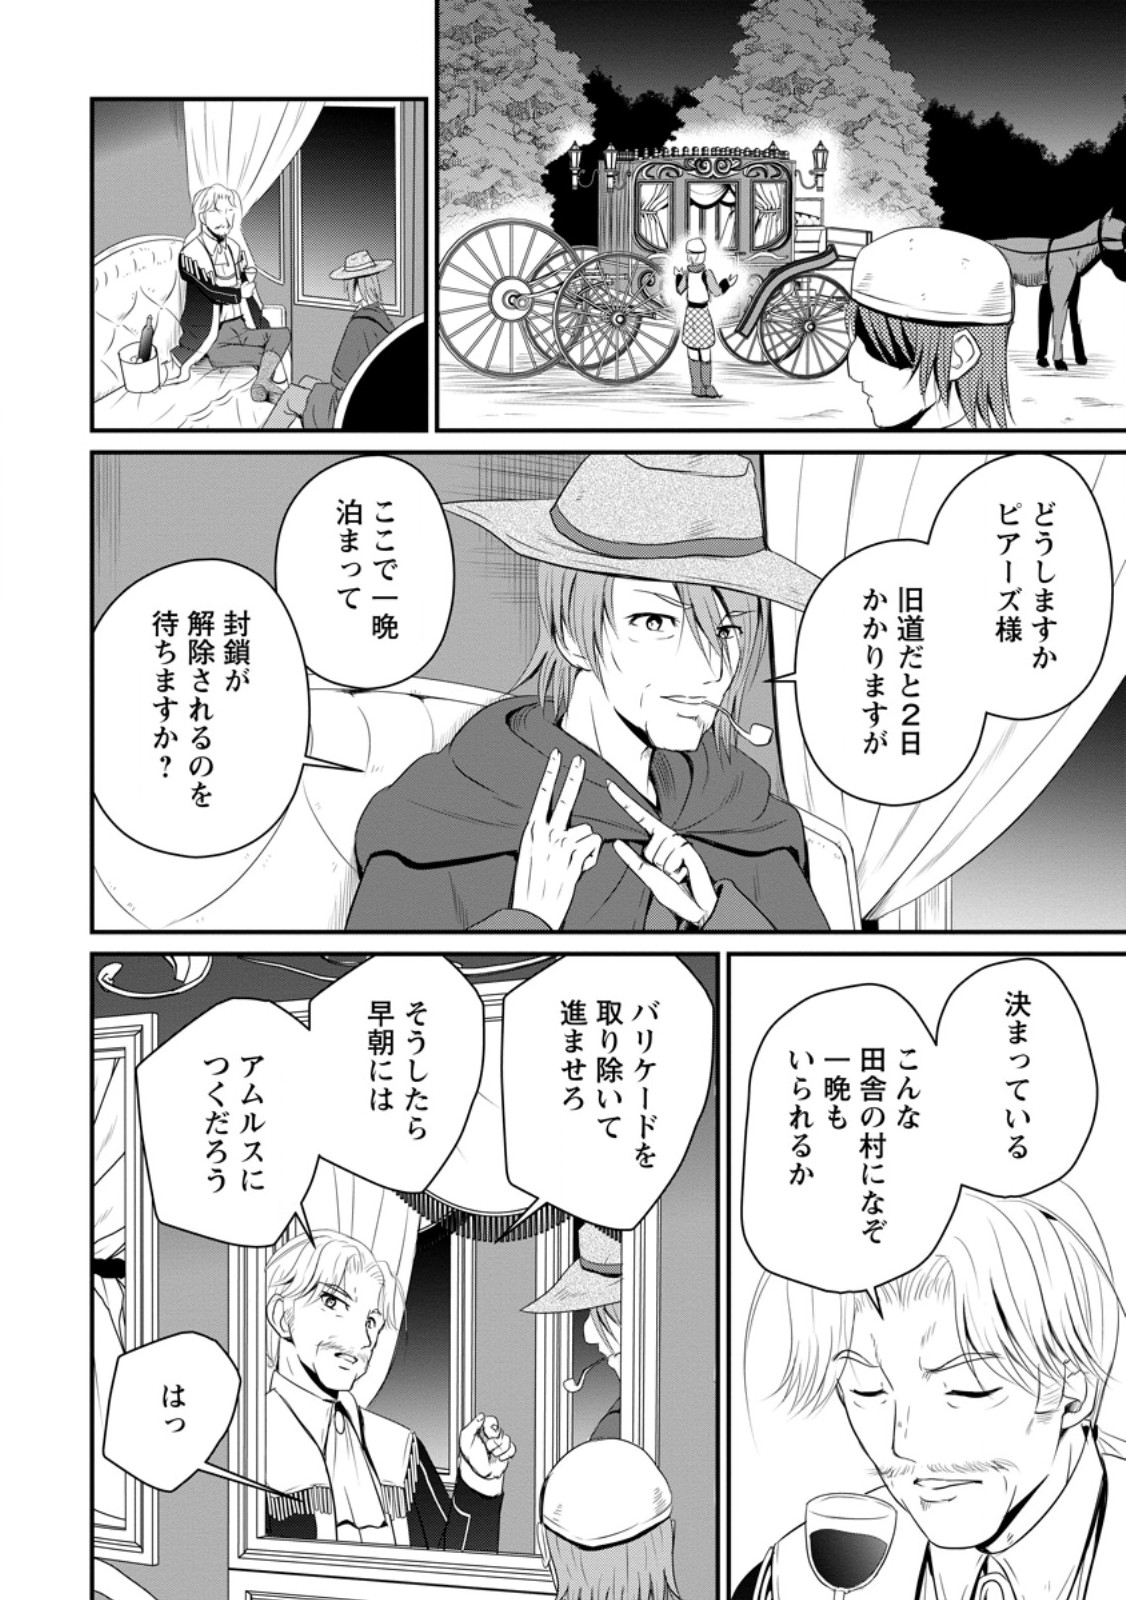 The Frontier Life of The Low-Class Ossan Healer And The Lovery Girl - Chapter 47.3 - Page 2